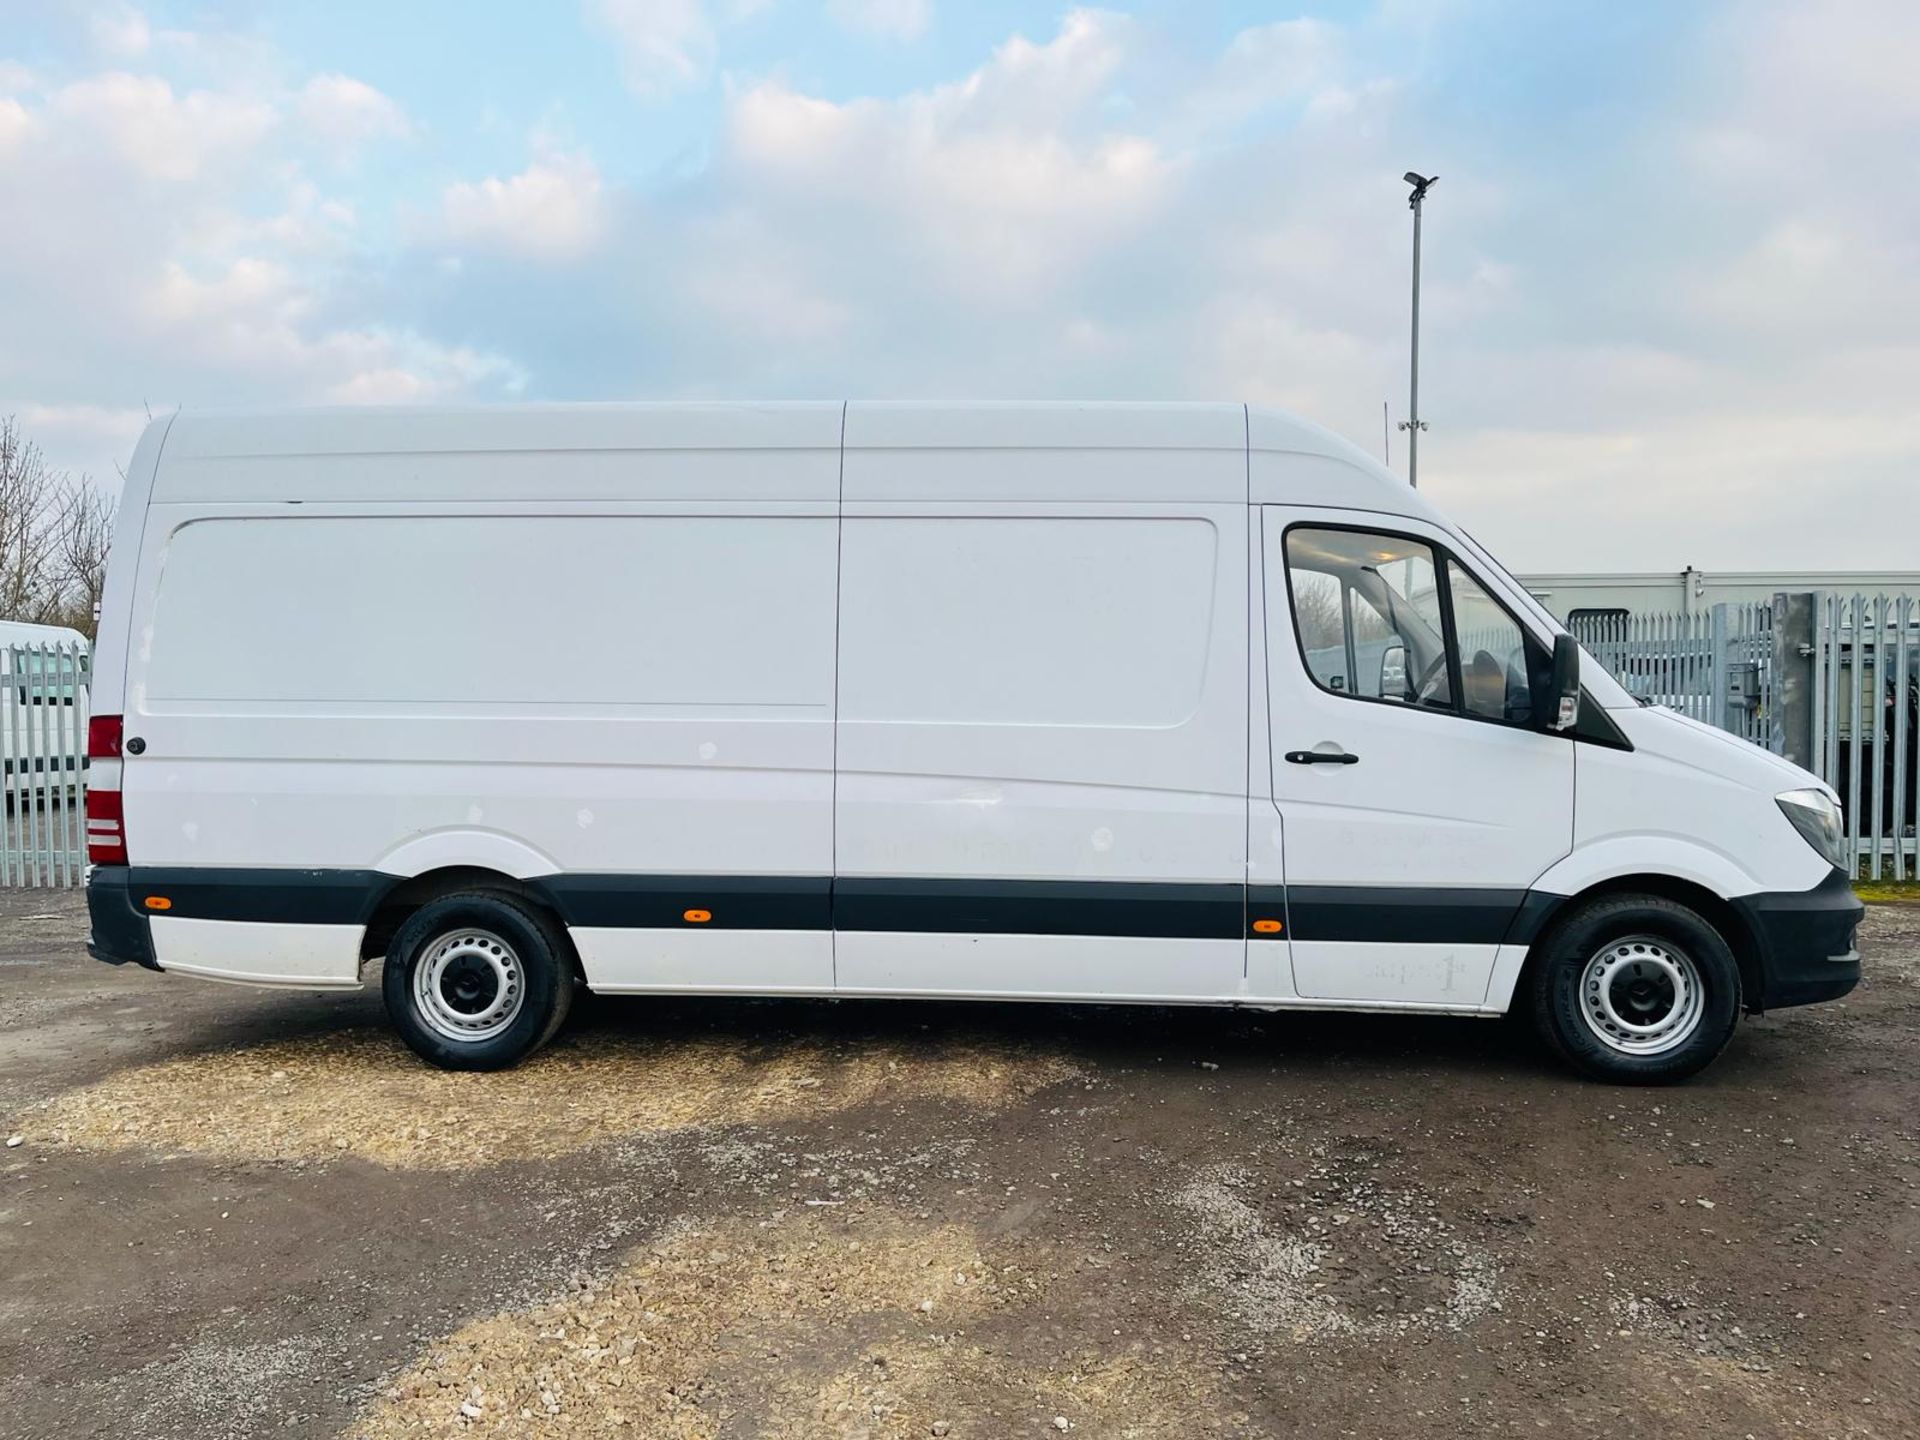 ** ON SALE ** Mercedes Benz Sprinter 2.1 313 CDI 3.5T L3 H3 2015 '15 Reg' Only 116,972 Miles - Image 14 of 28